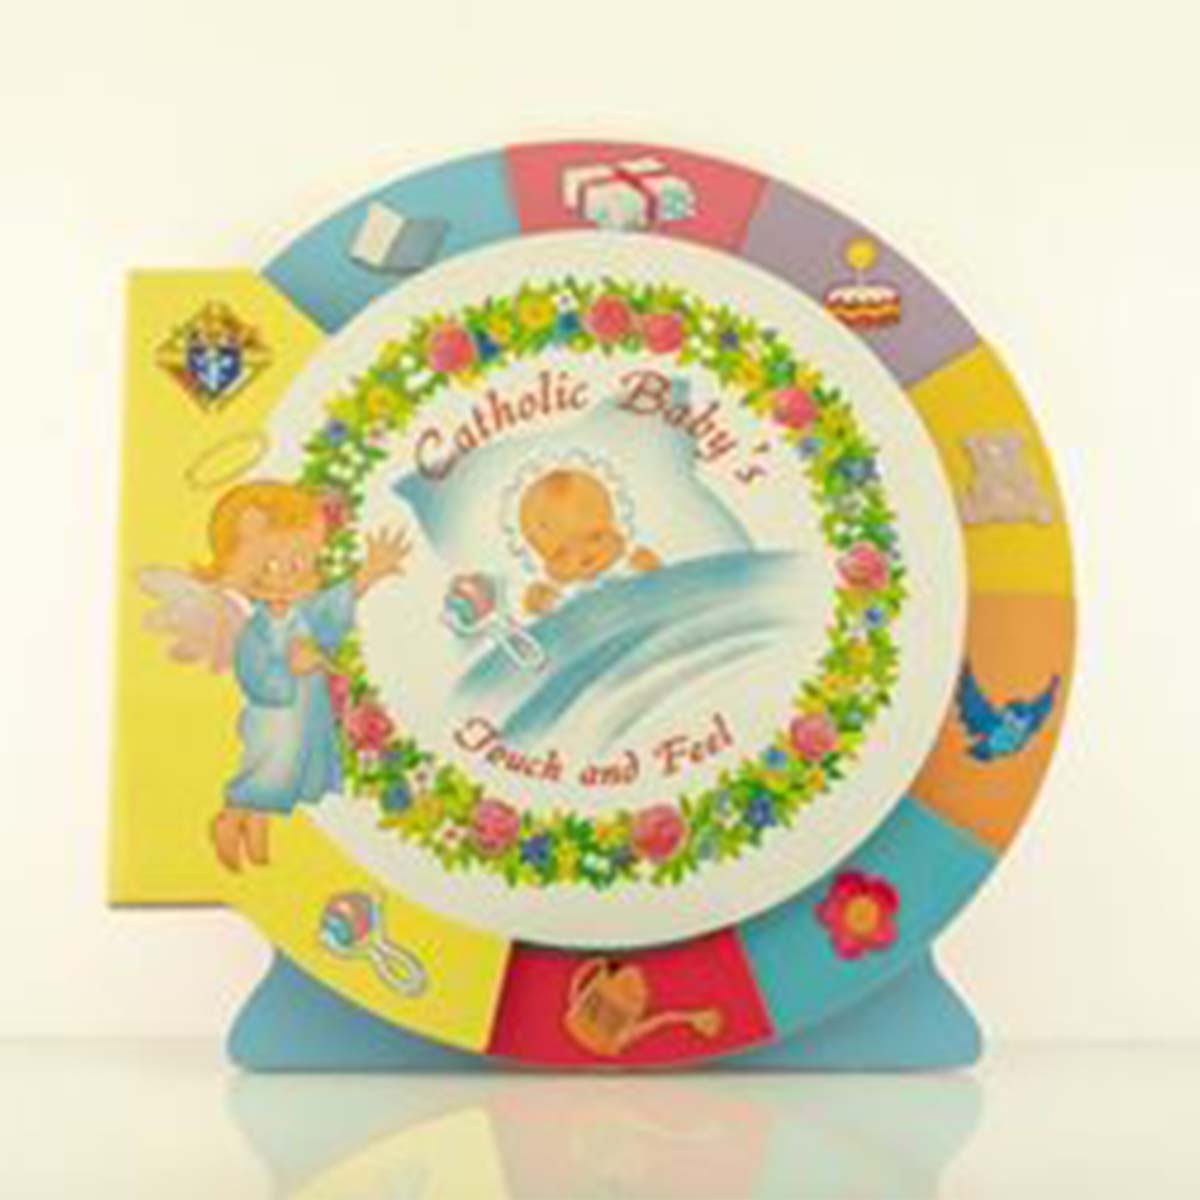 Catholic Baby&#39;s Touch and Feel Book with Knights of Columbus Logo